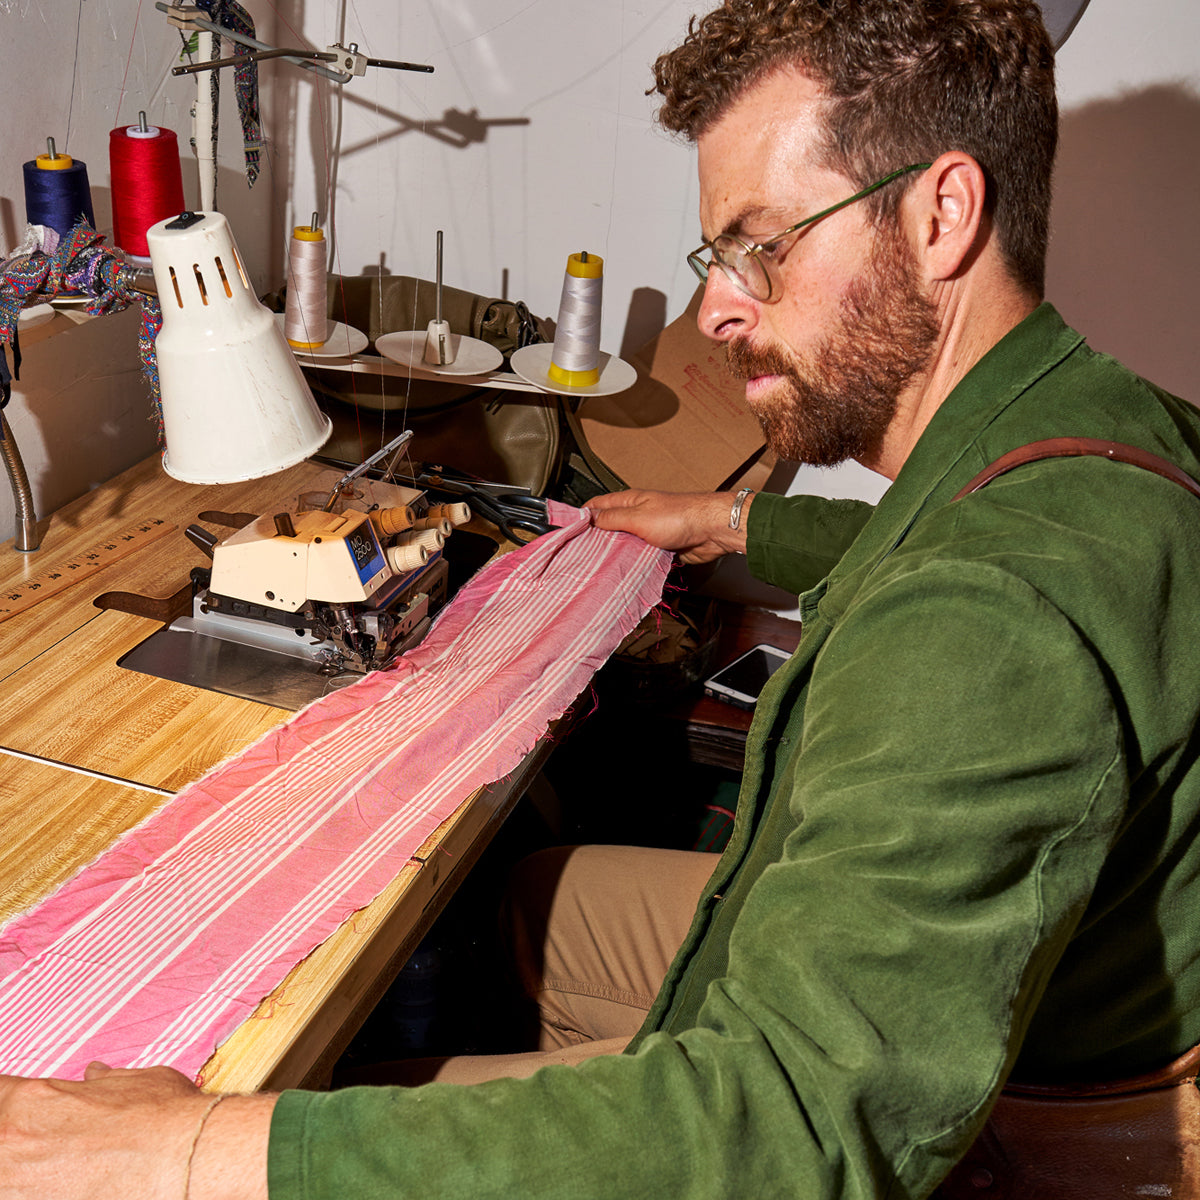 Matthew Schildkretr, founder of Late Sunday Afternoon in Venice, California, sitting at his workbench with a strip of pink fabric.